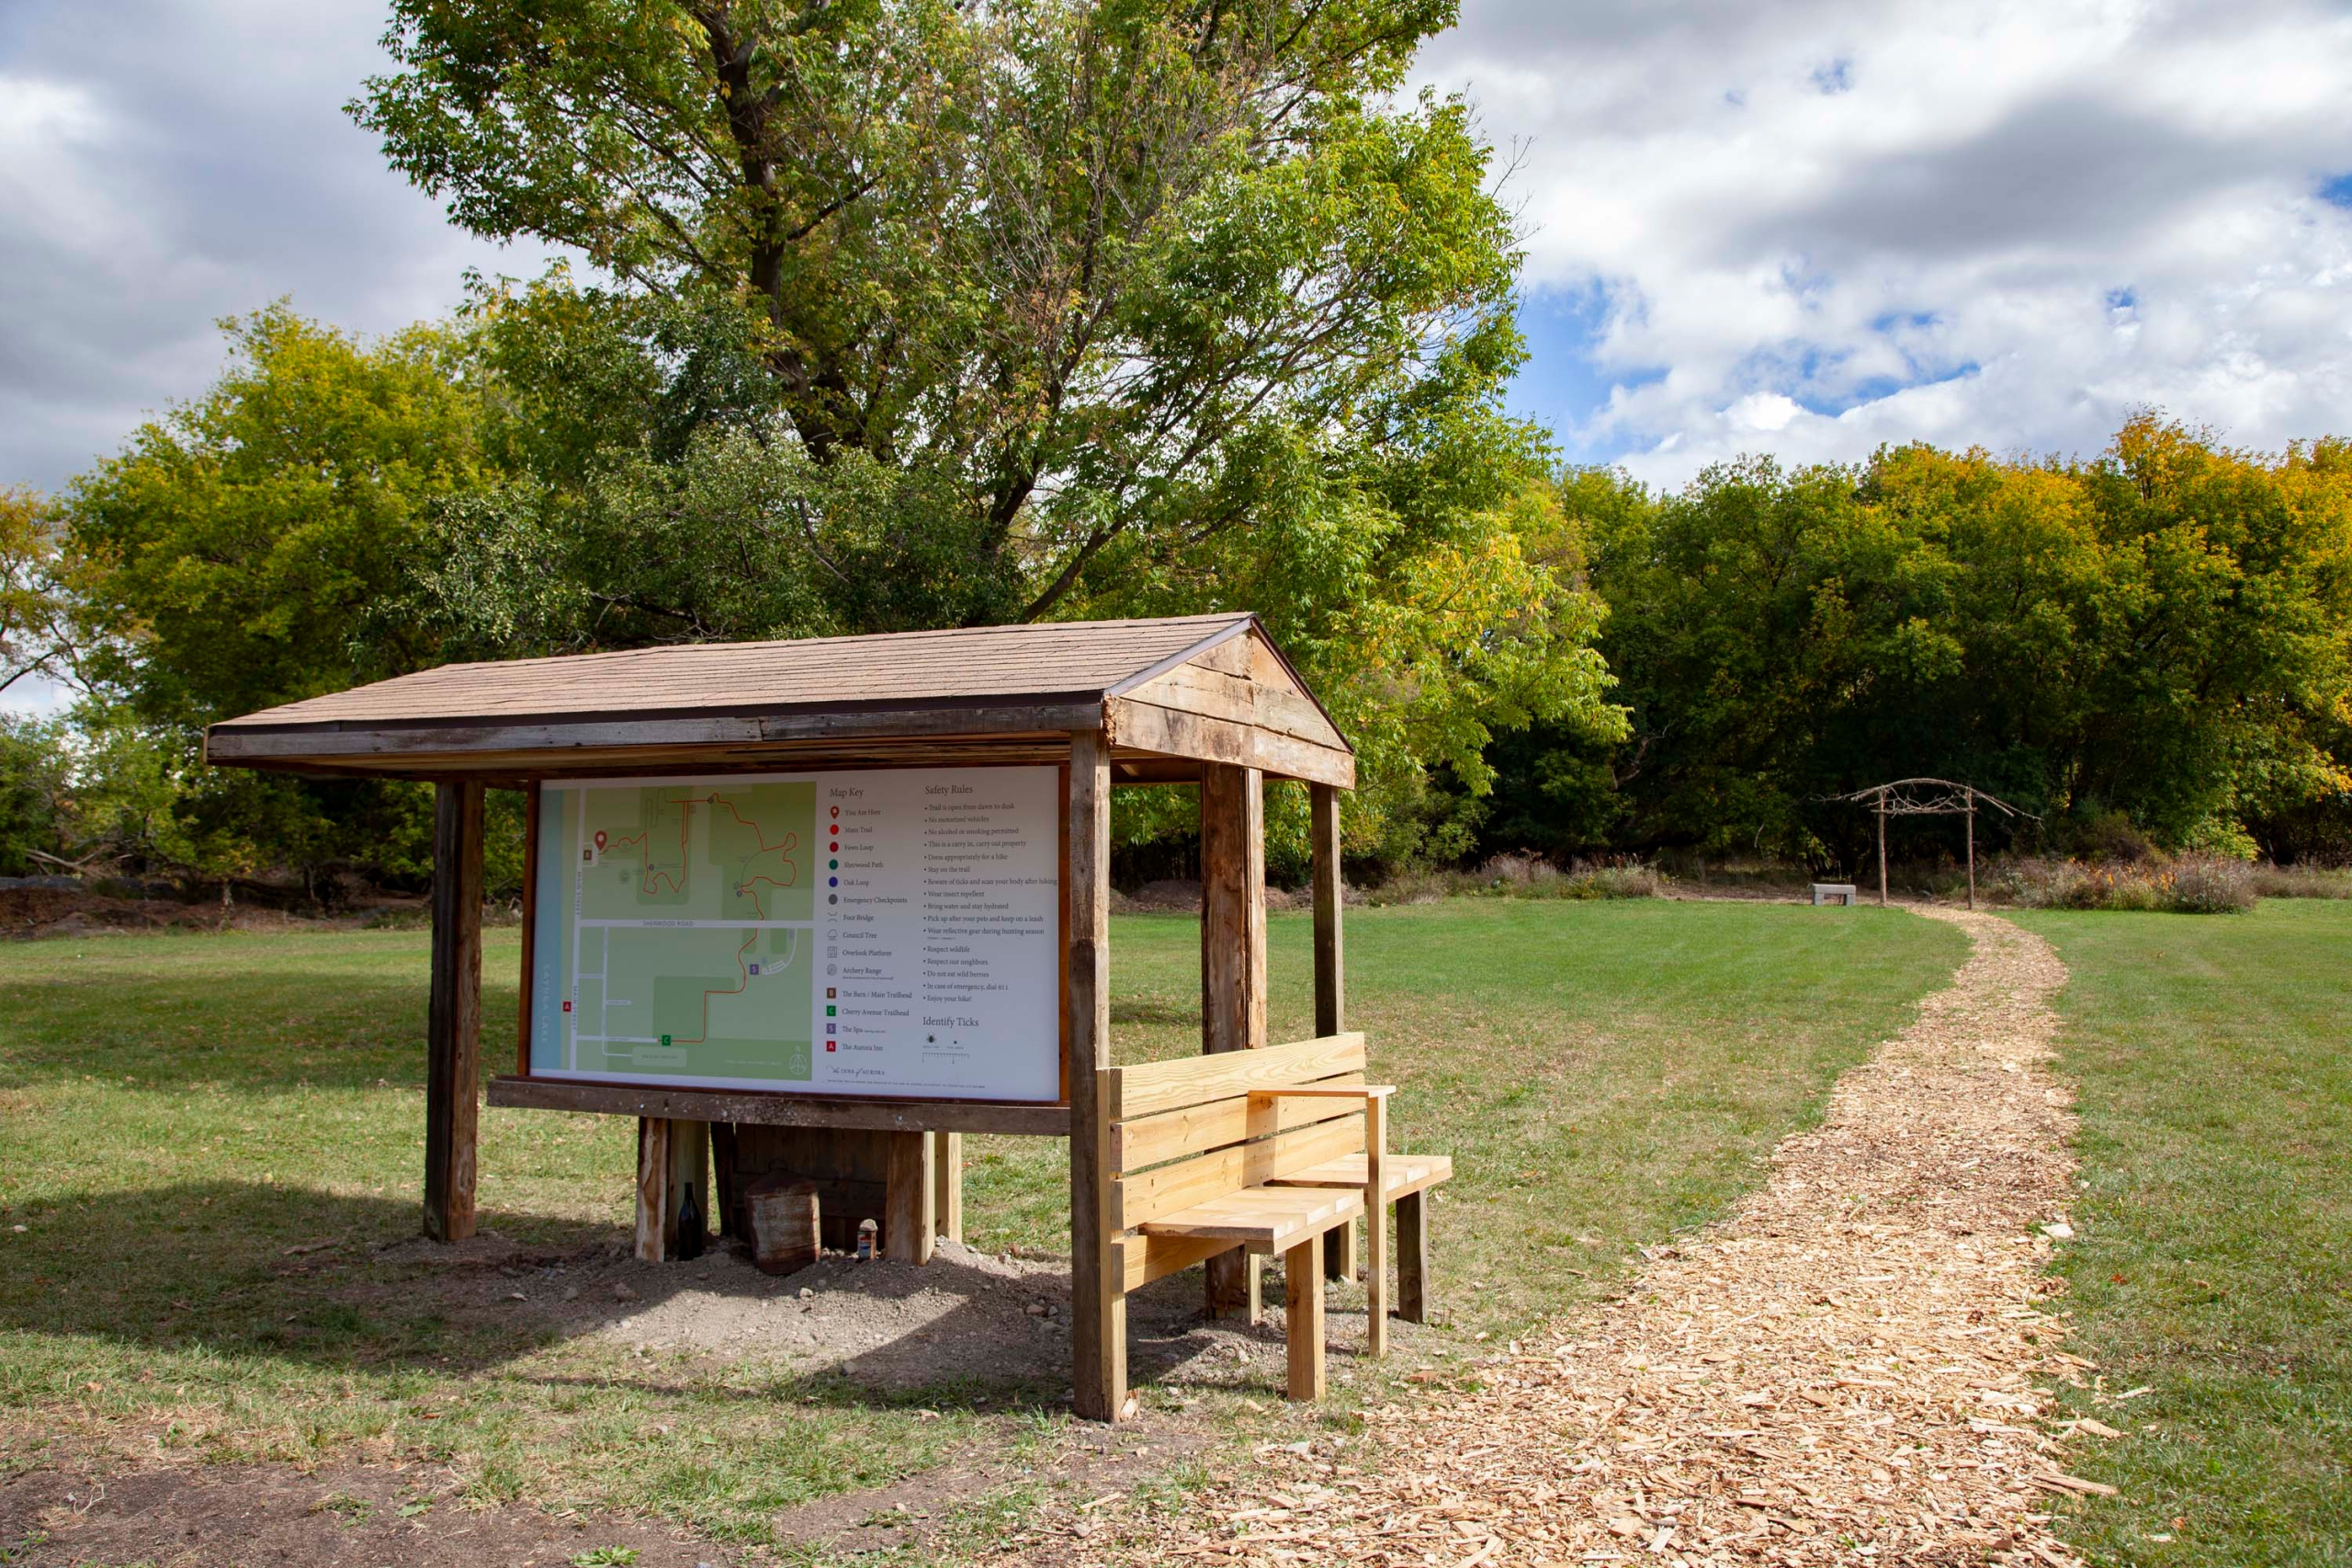 A wooden shelter with a bench and map of nature trails.